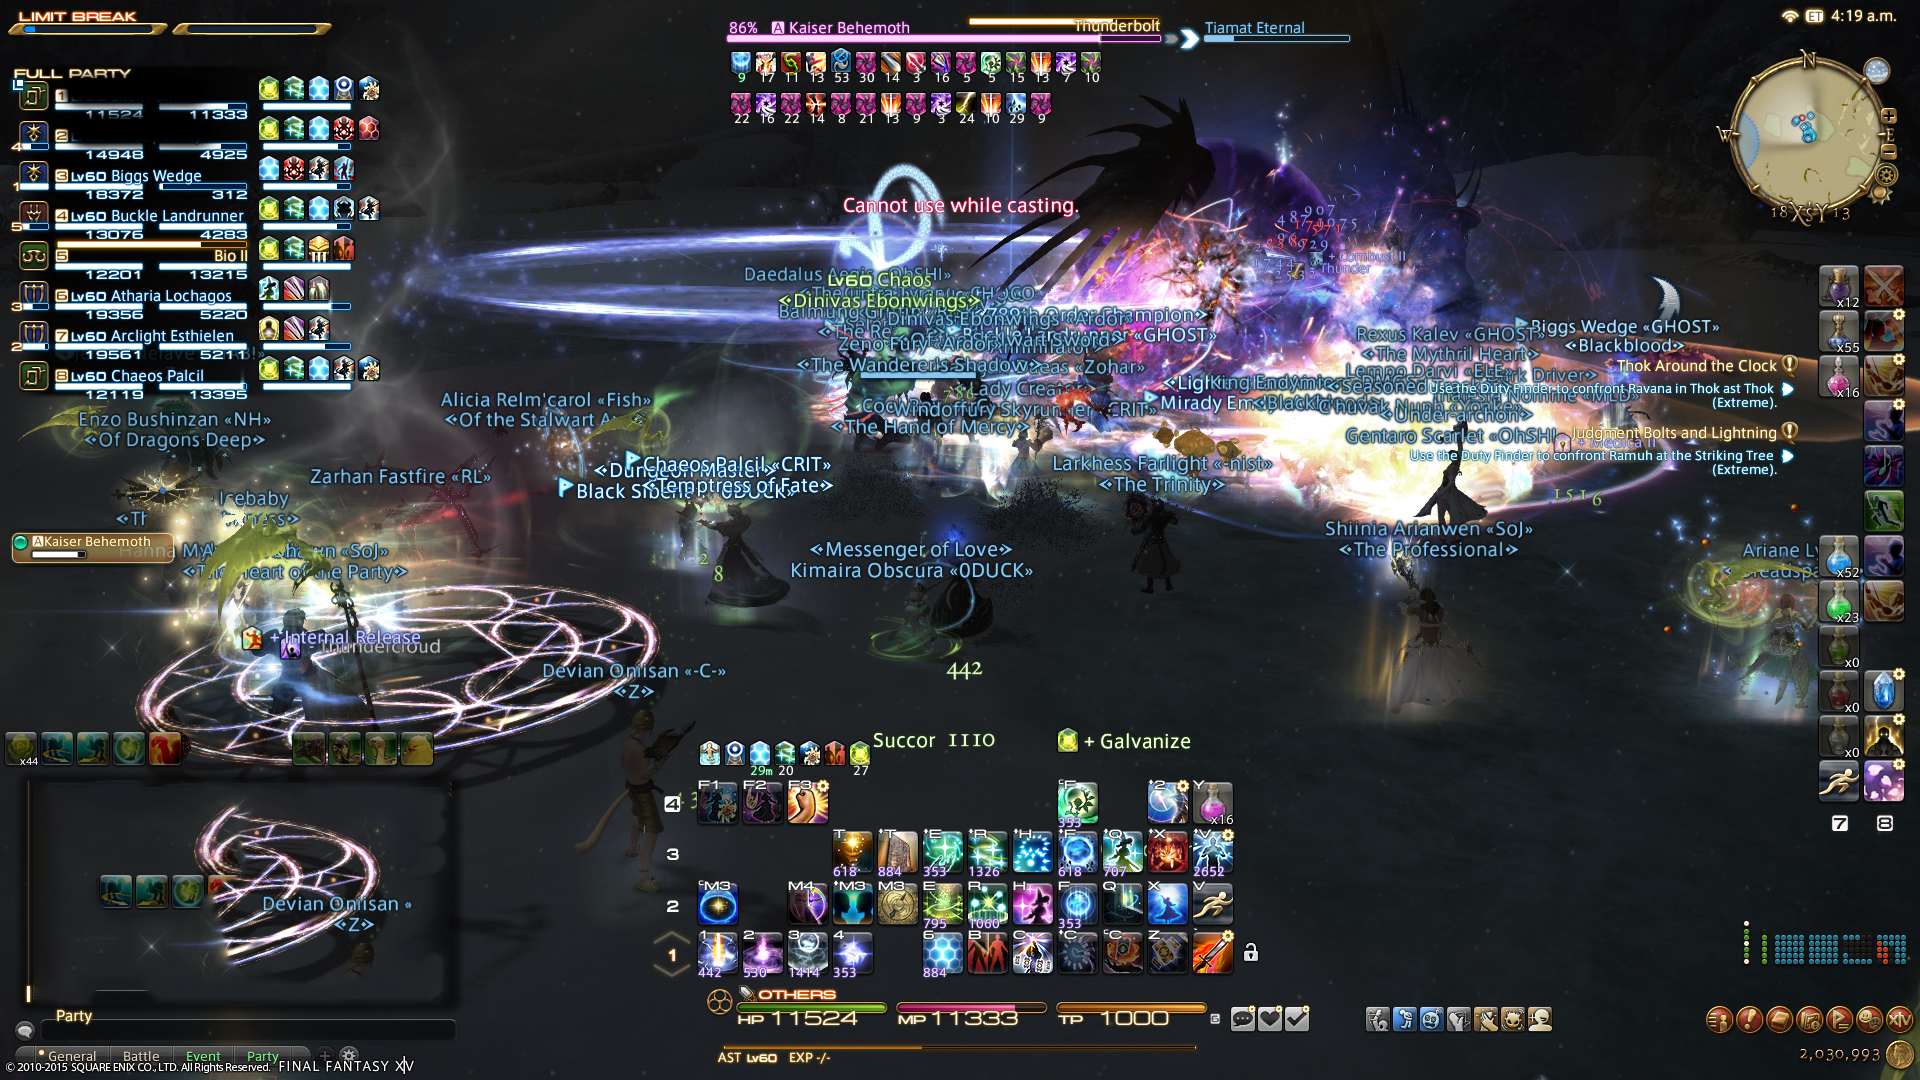 ffxiv_27092015_173702.jpg- Viewing image -The Picture Hostin